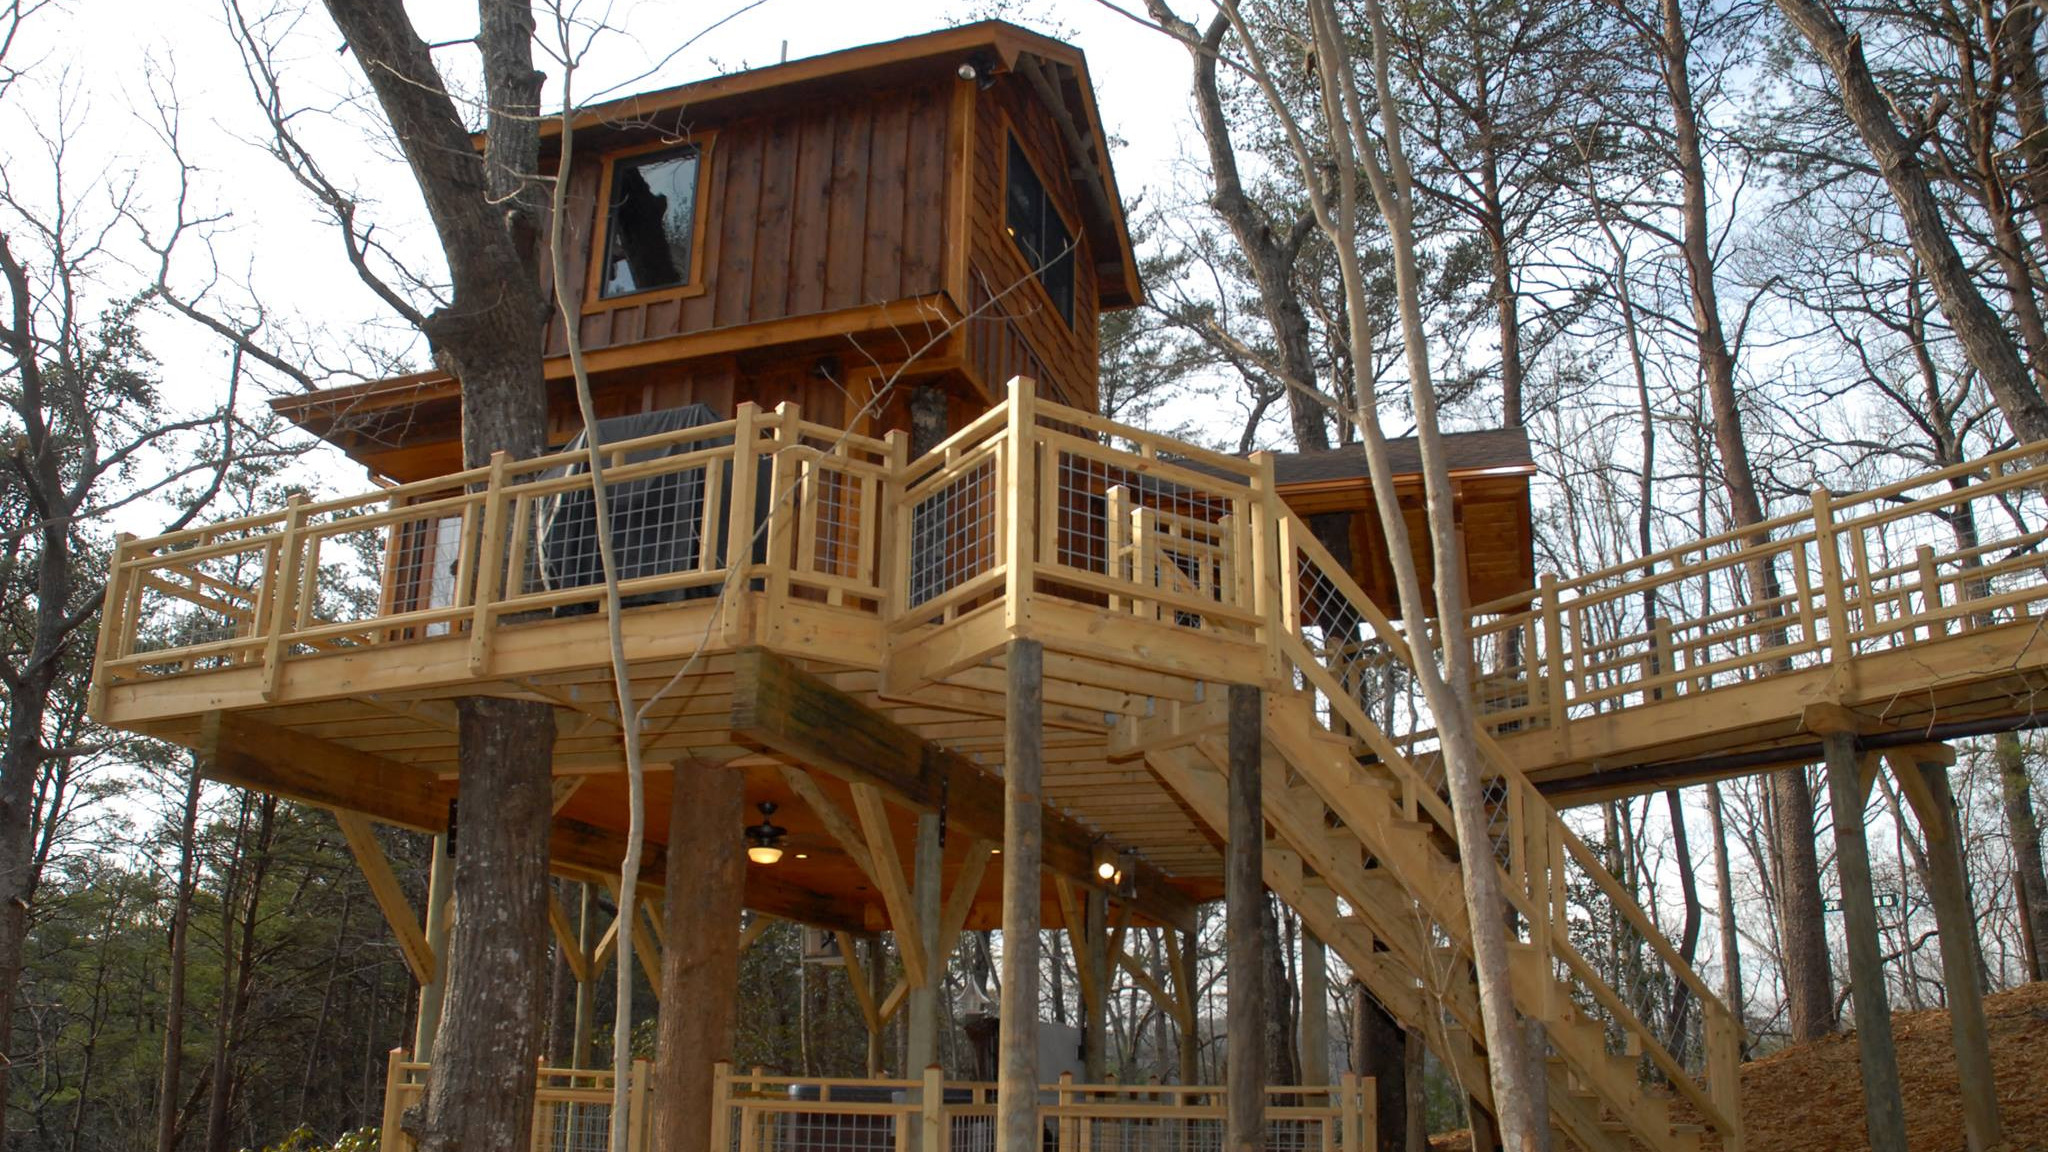 The charms of treehouse cabins